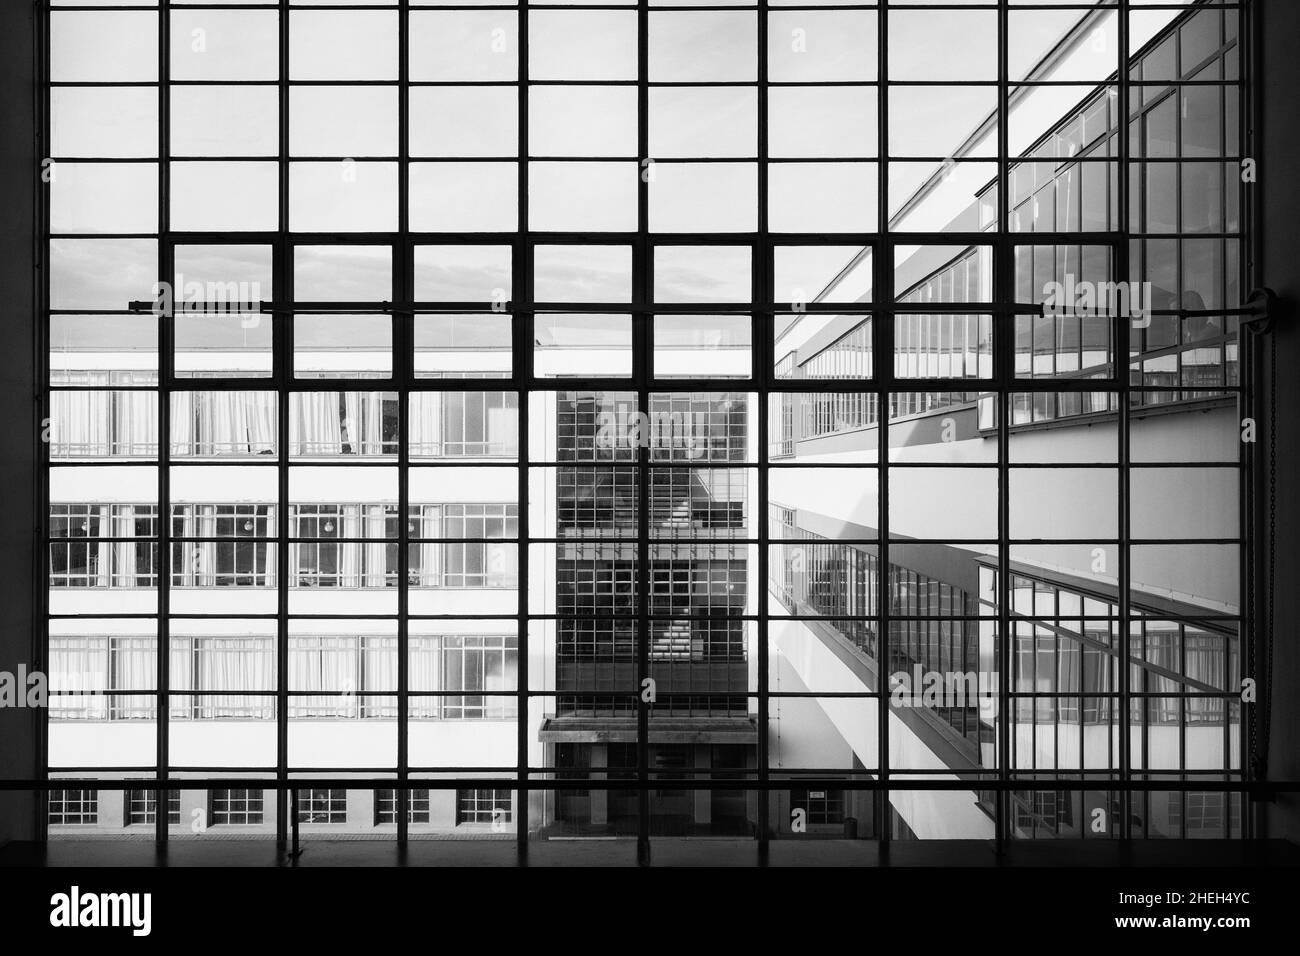 Bauhaus architecture at the School of Design at Dessau, Germany Stock Photo